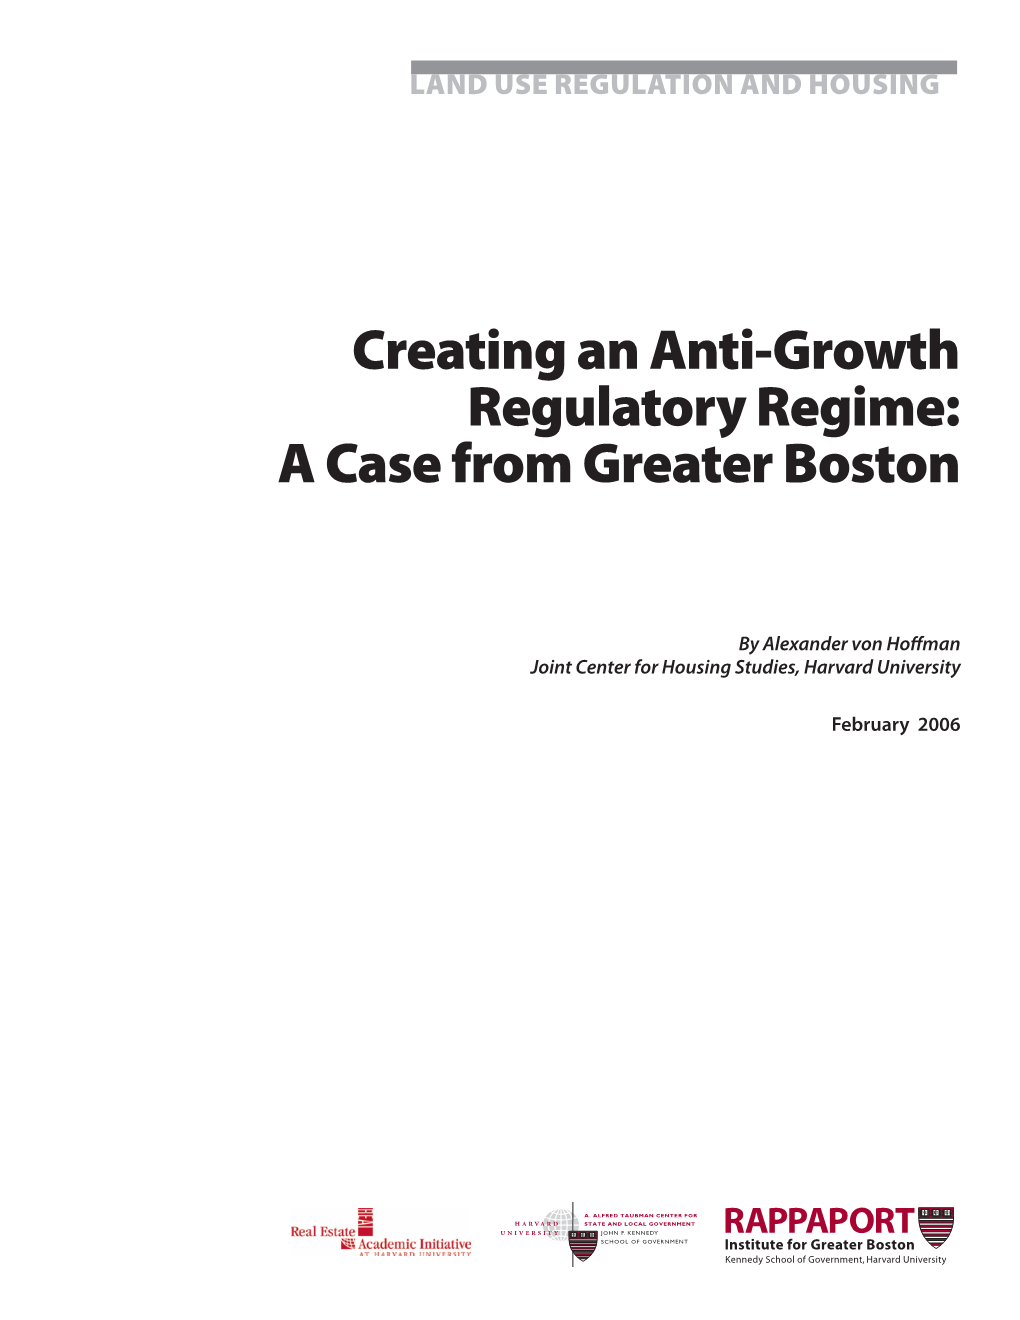 Creating an Anti-Growth Regulatory Regime: a Case from Greater Boston